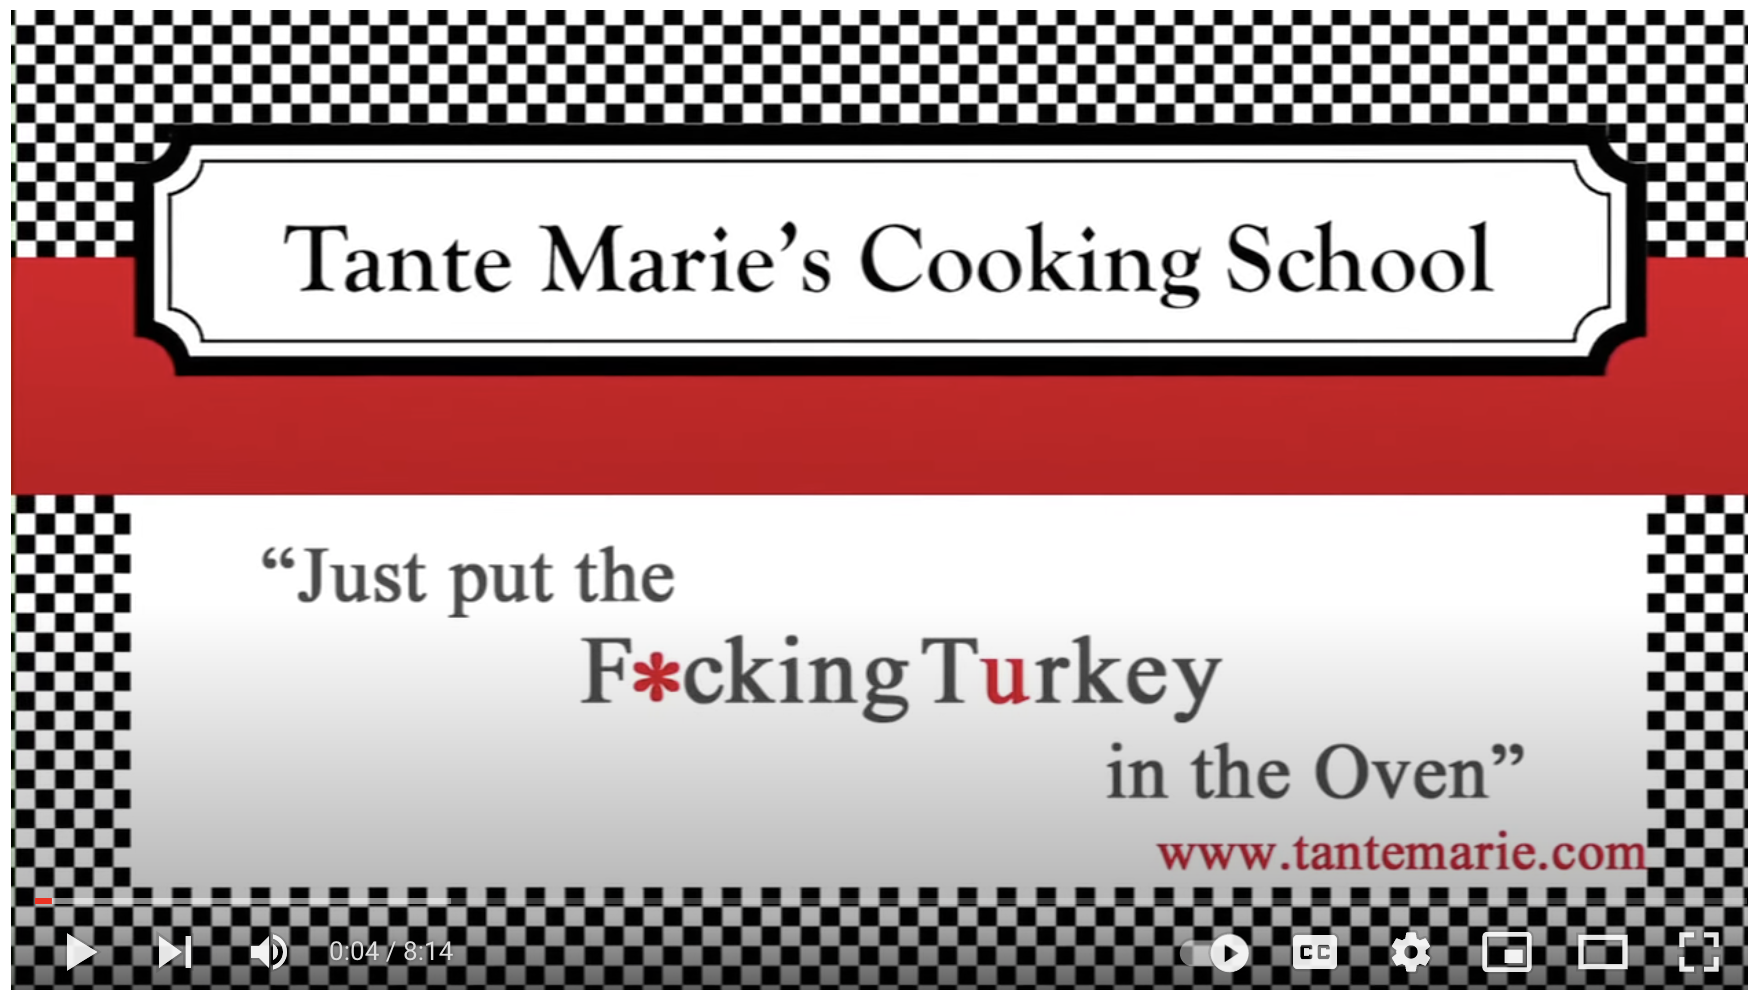 Watch "Just Put the F*cking Turkey in the Oven" for a laugh